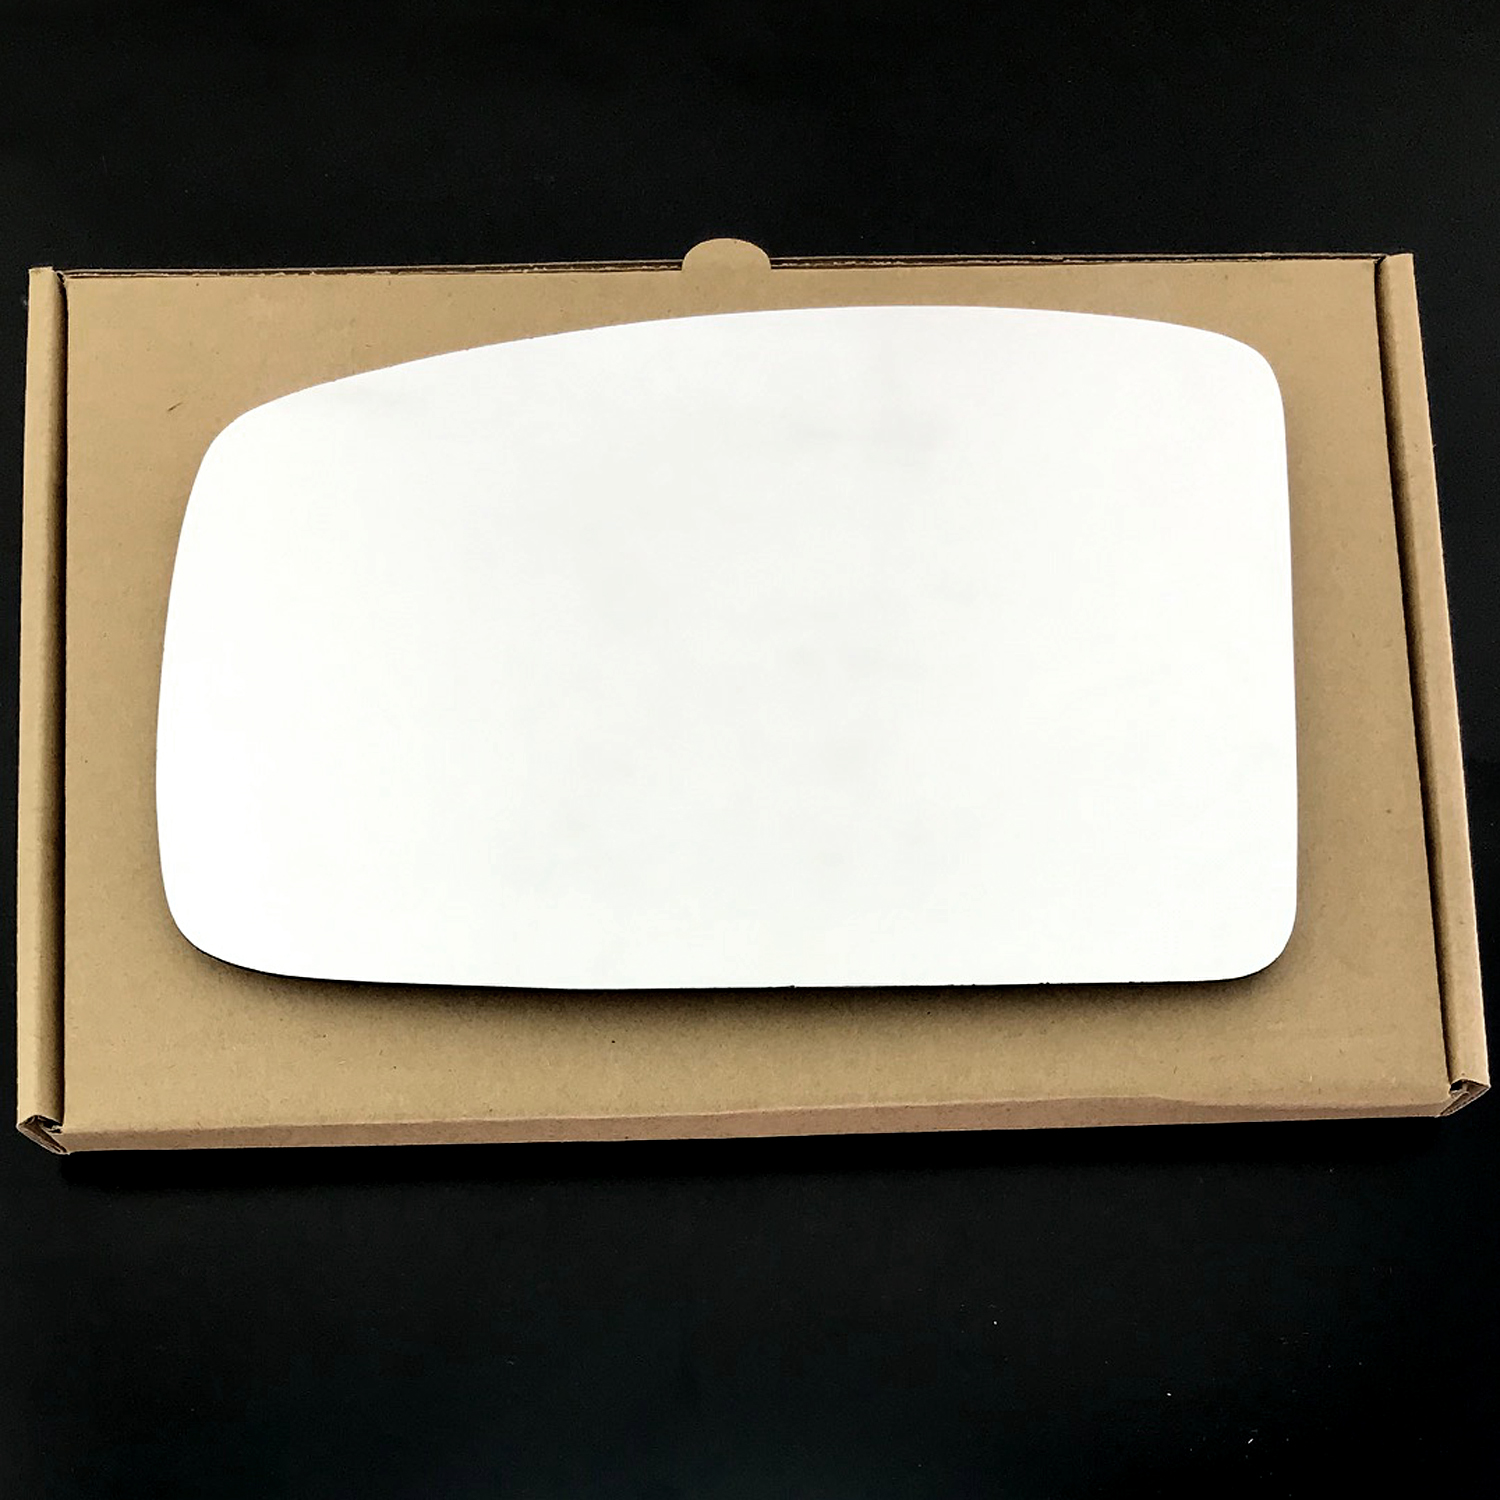 Vauxhall Movano Wing Mirror Glass RIGHT HAND ( UK Driver Side ) 2011 to 2020 – Convex Wing Mirror